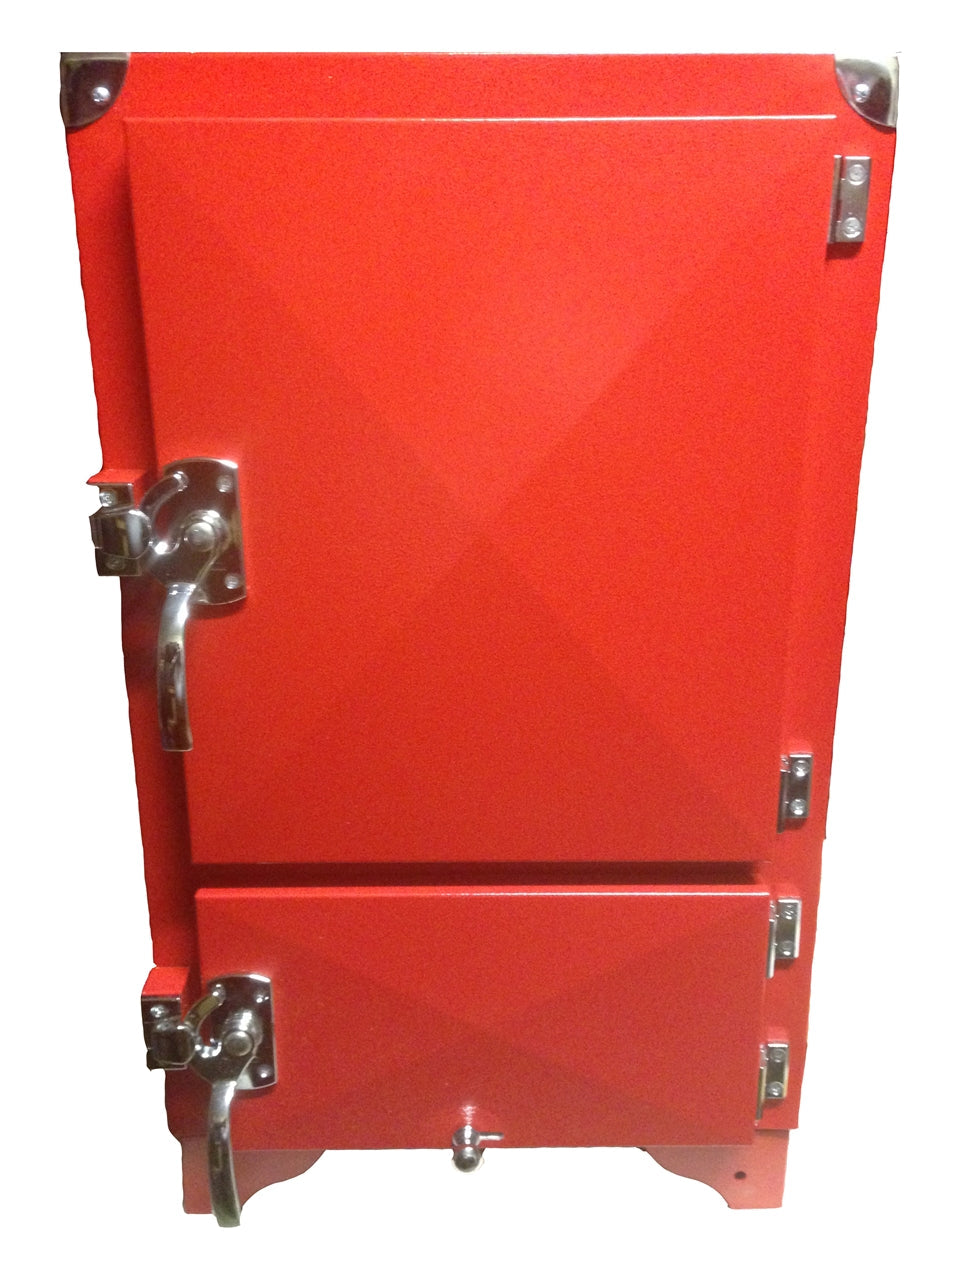 Red Box Smoker with Fire Box Insert